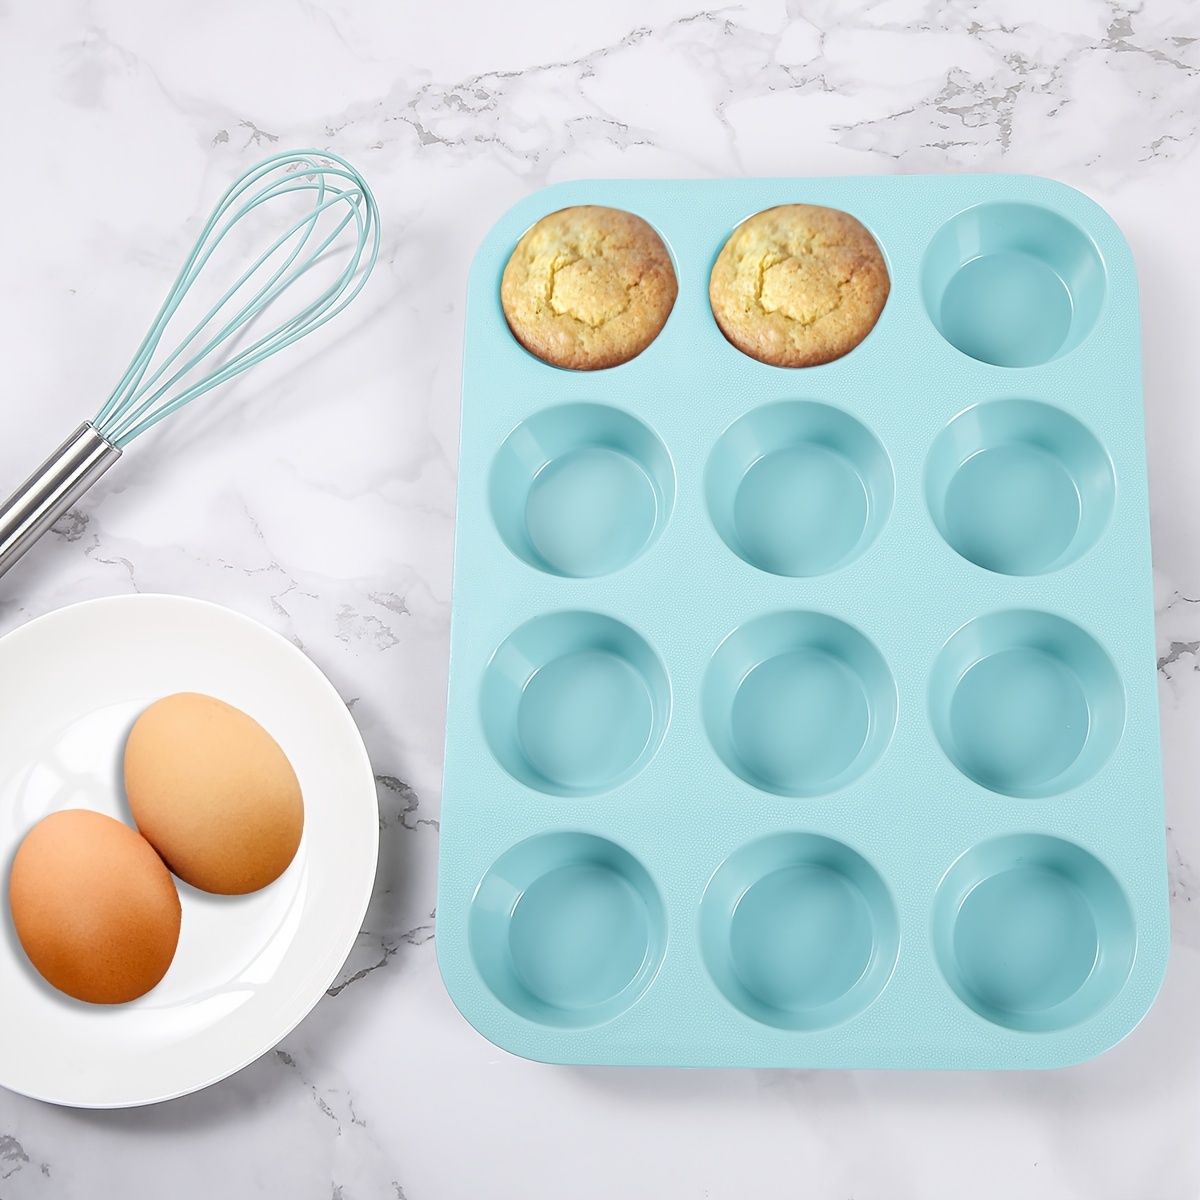 41pcs Silicone Baking Pan, Silicone Cake Molds, Baking Sheet, Donut Pan,  Silicone Muffin Pan With 36 Pack Silicone Baking Cups, Dishwasher Safe